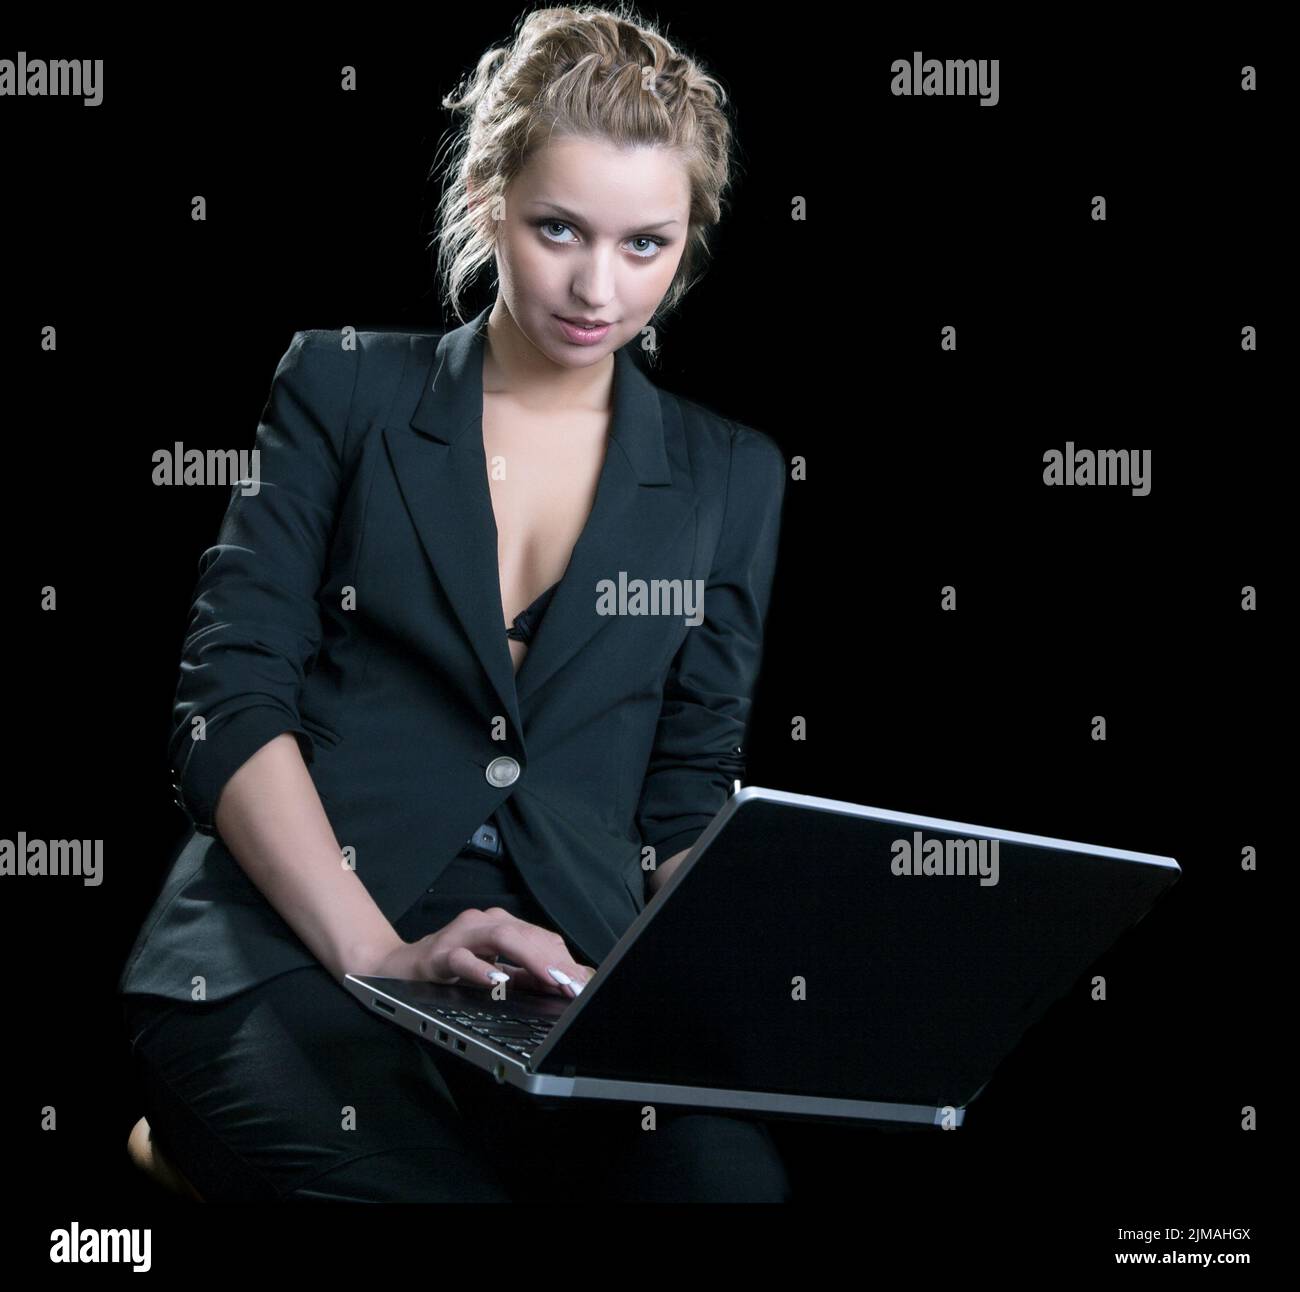 Girl in a business suit with the laptop on  black background Stock Photo